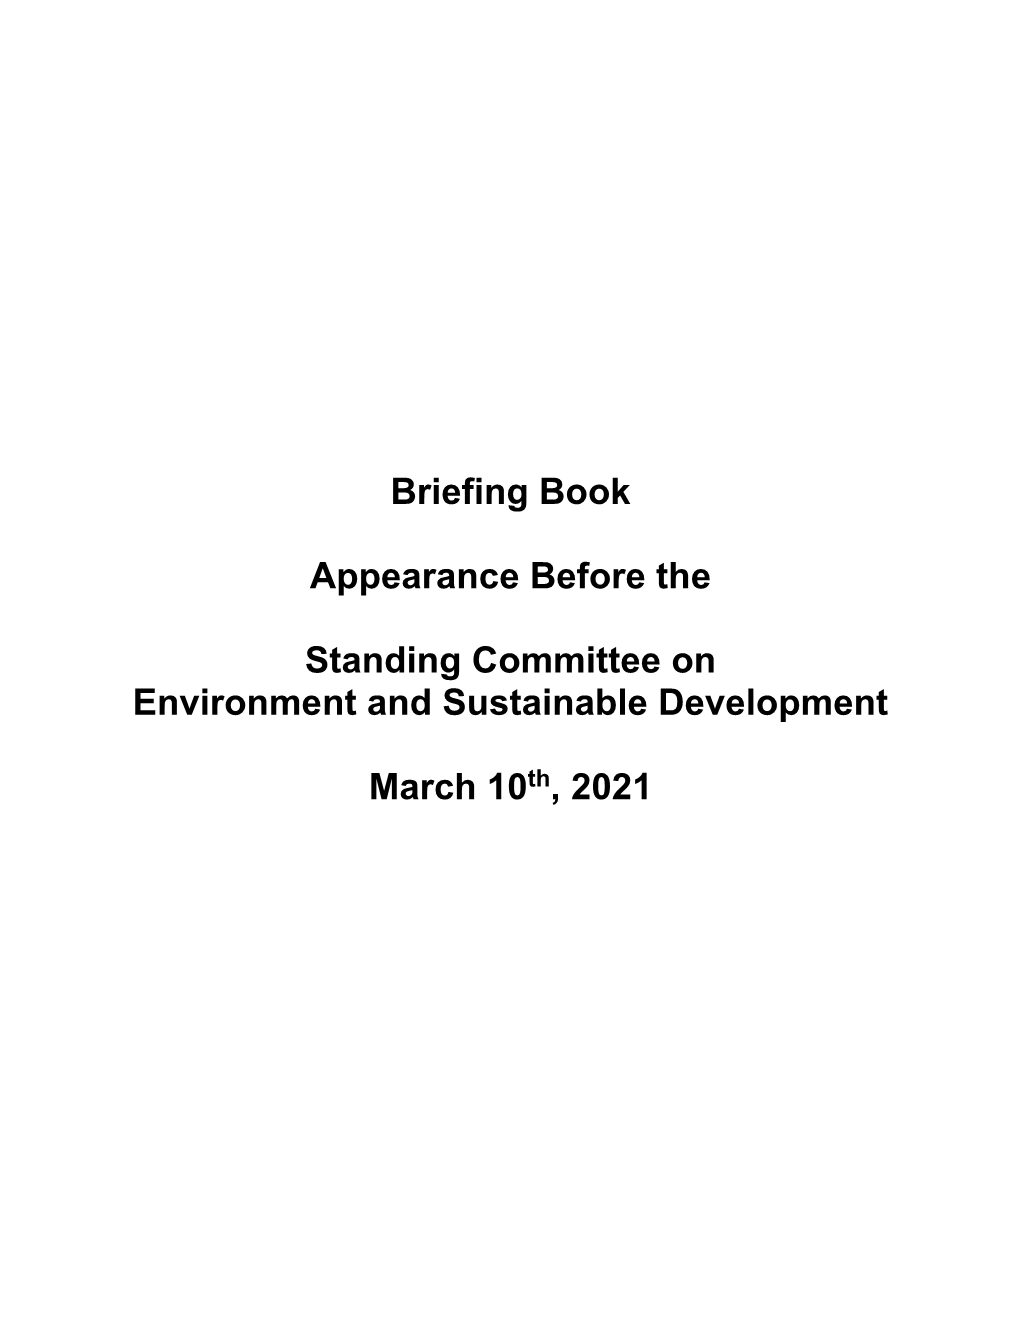 Briefing Book — Appearance Before the Standing Committee On